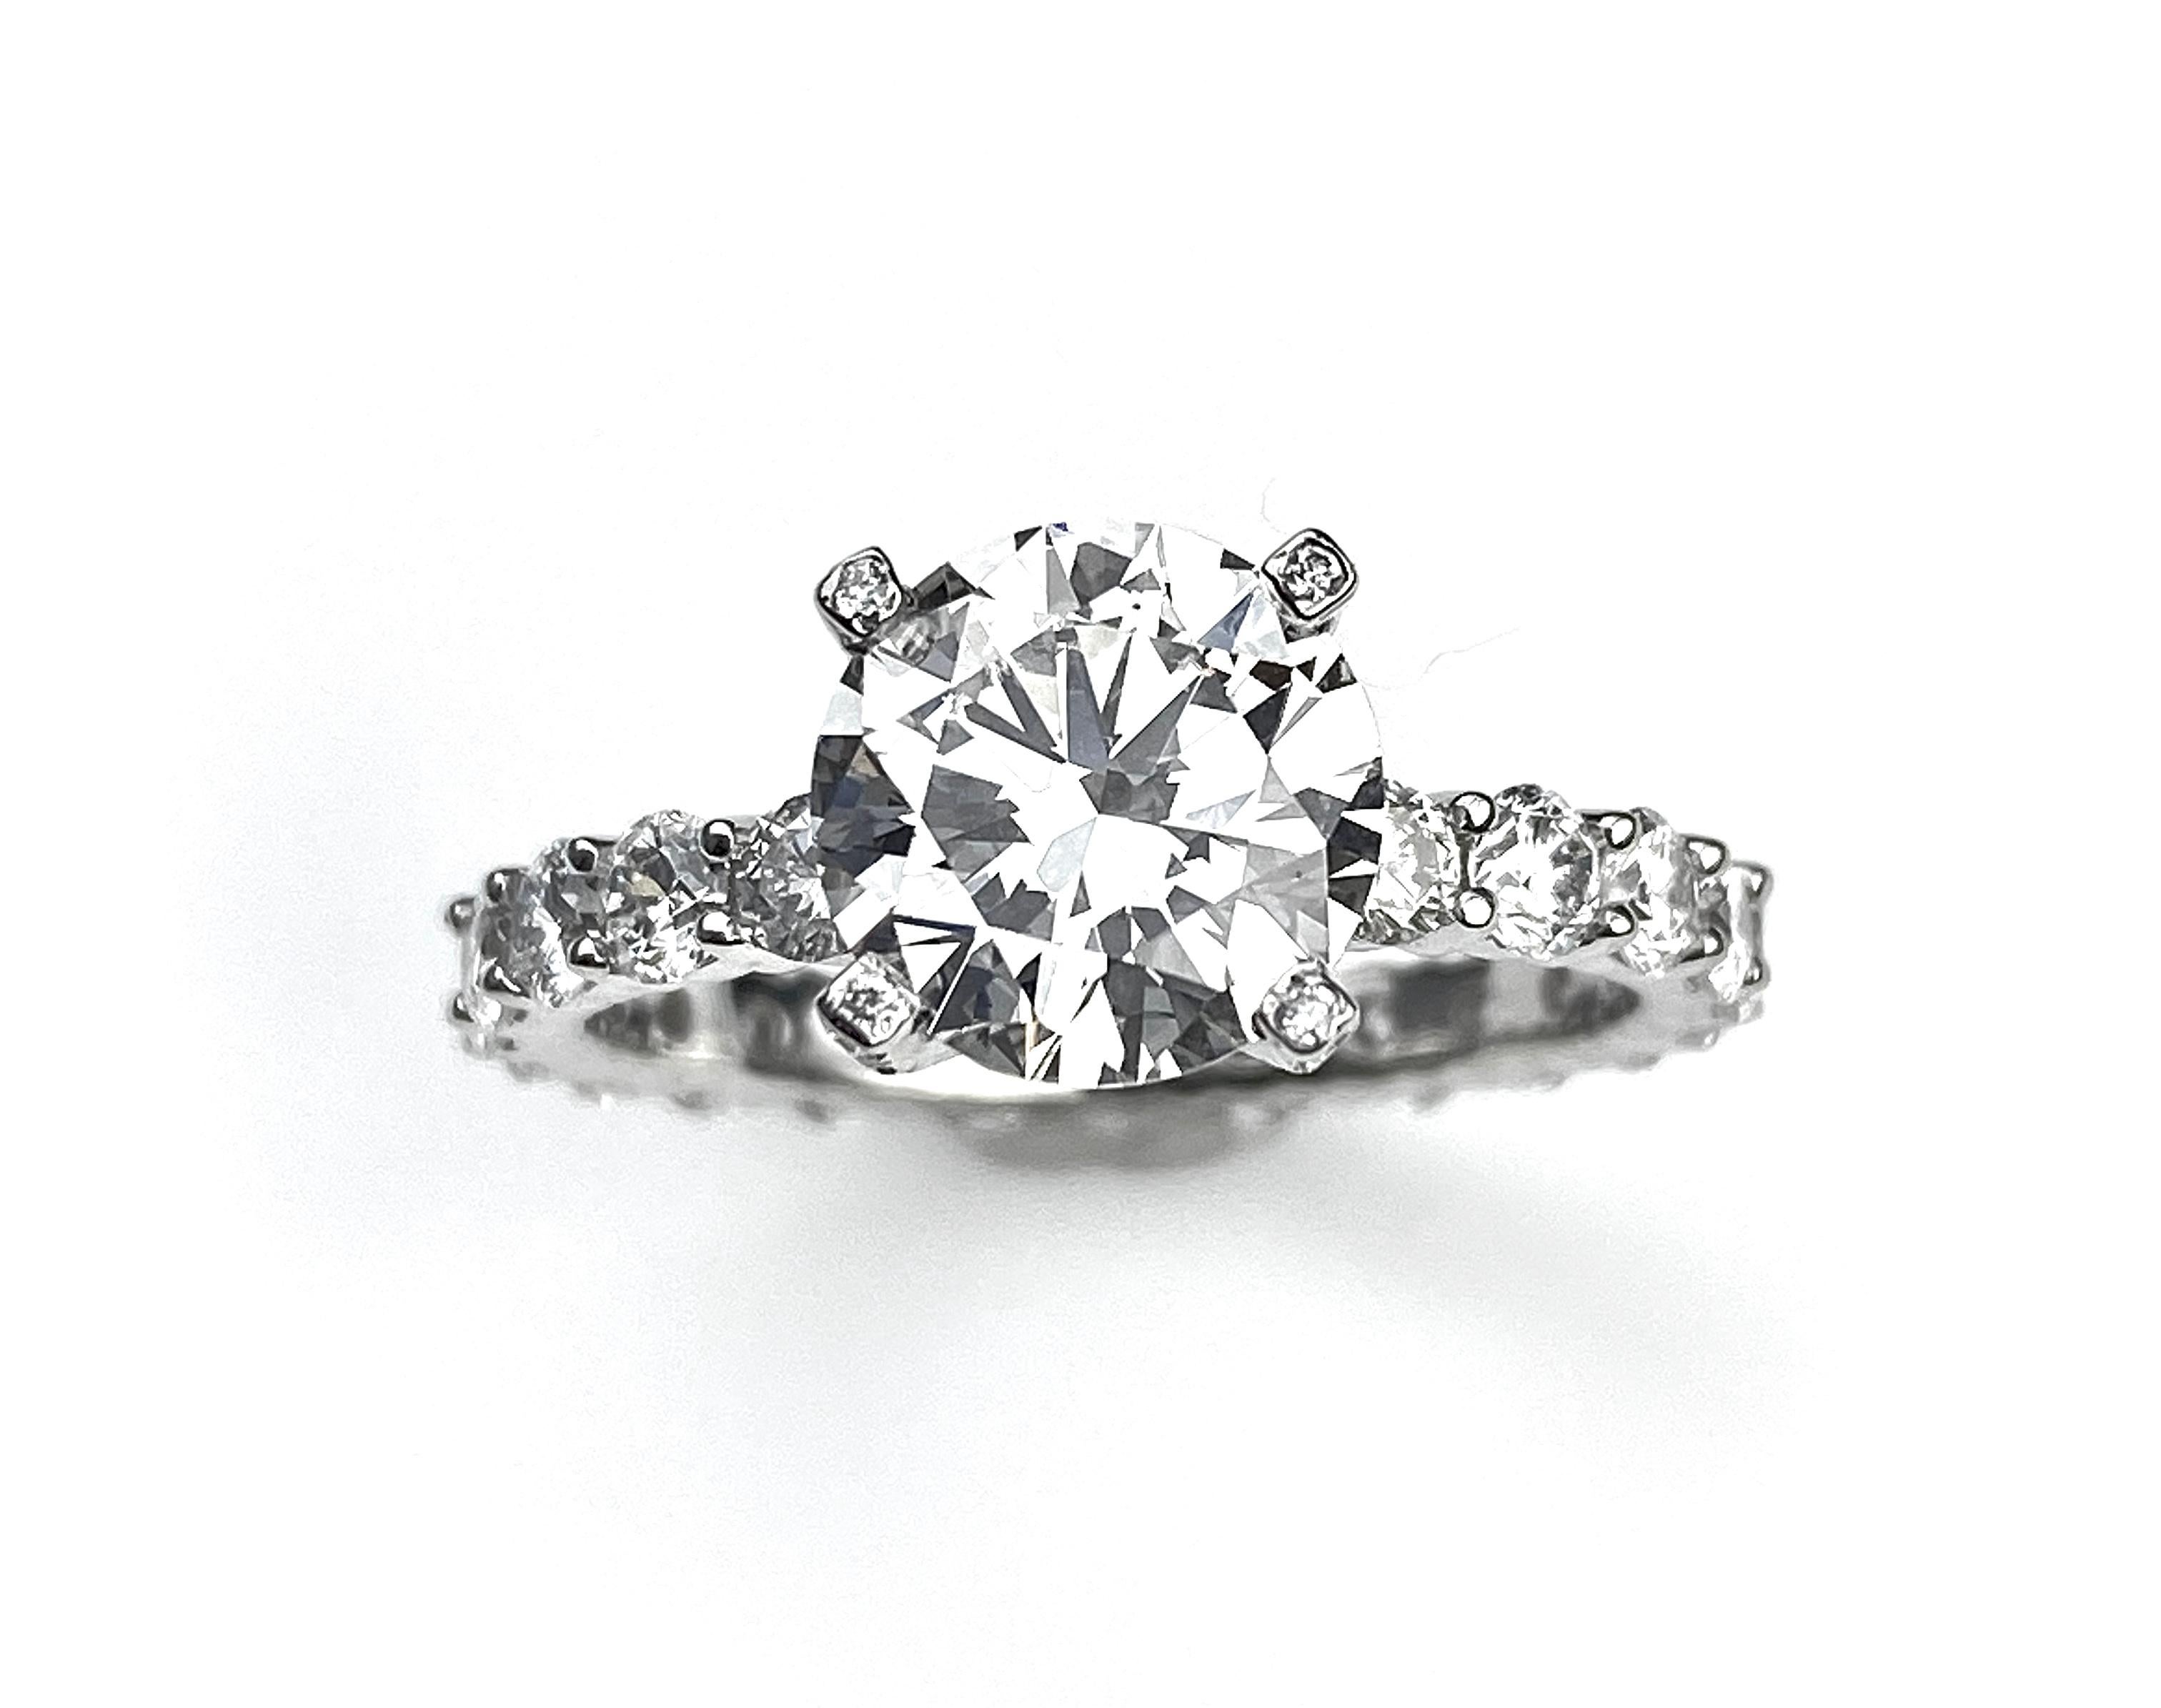 2.02ct I colour VS2 clarity, GIA#2127721422, round brilliant cut diamond engagement ring with 1.77ct total diamonds set in the gallery and full eternity all the way around. 18k white gold setting. Currently sized 6.5. 